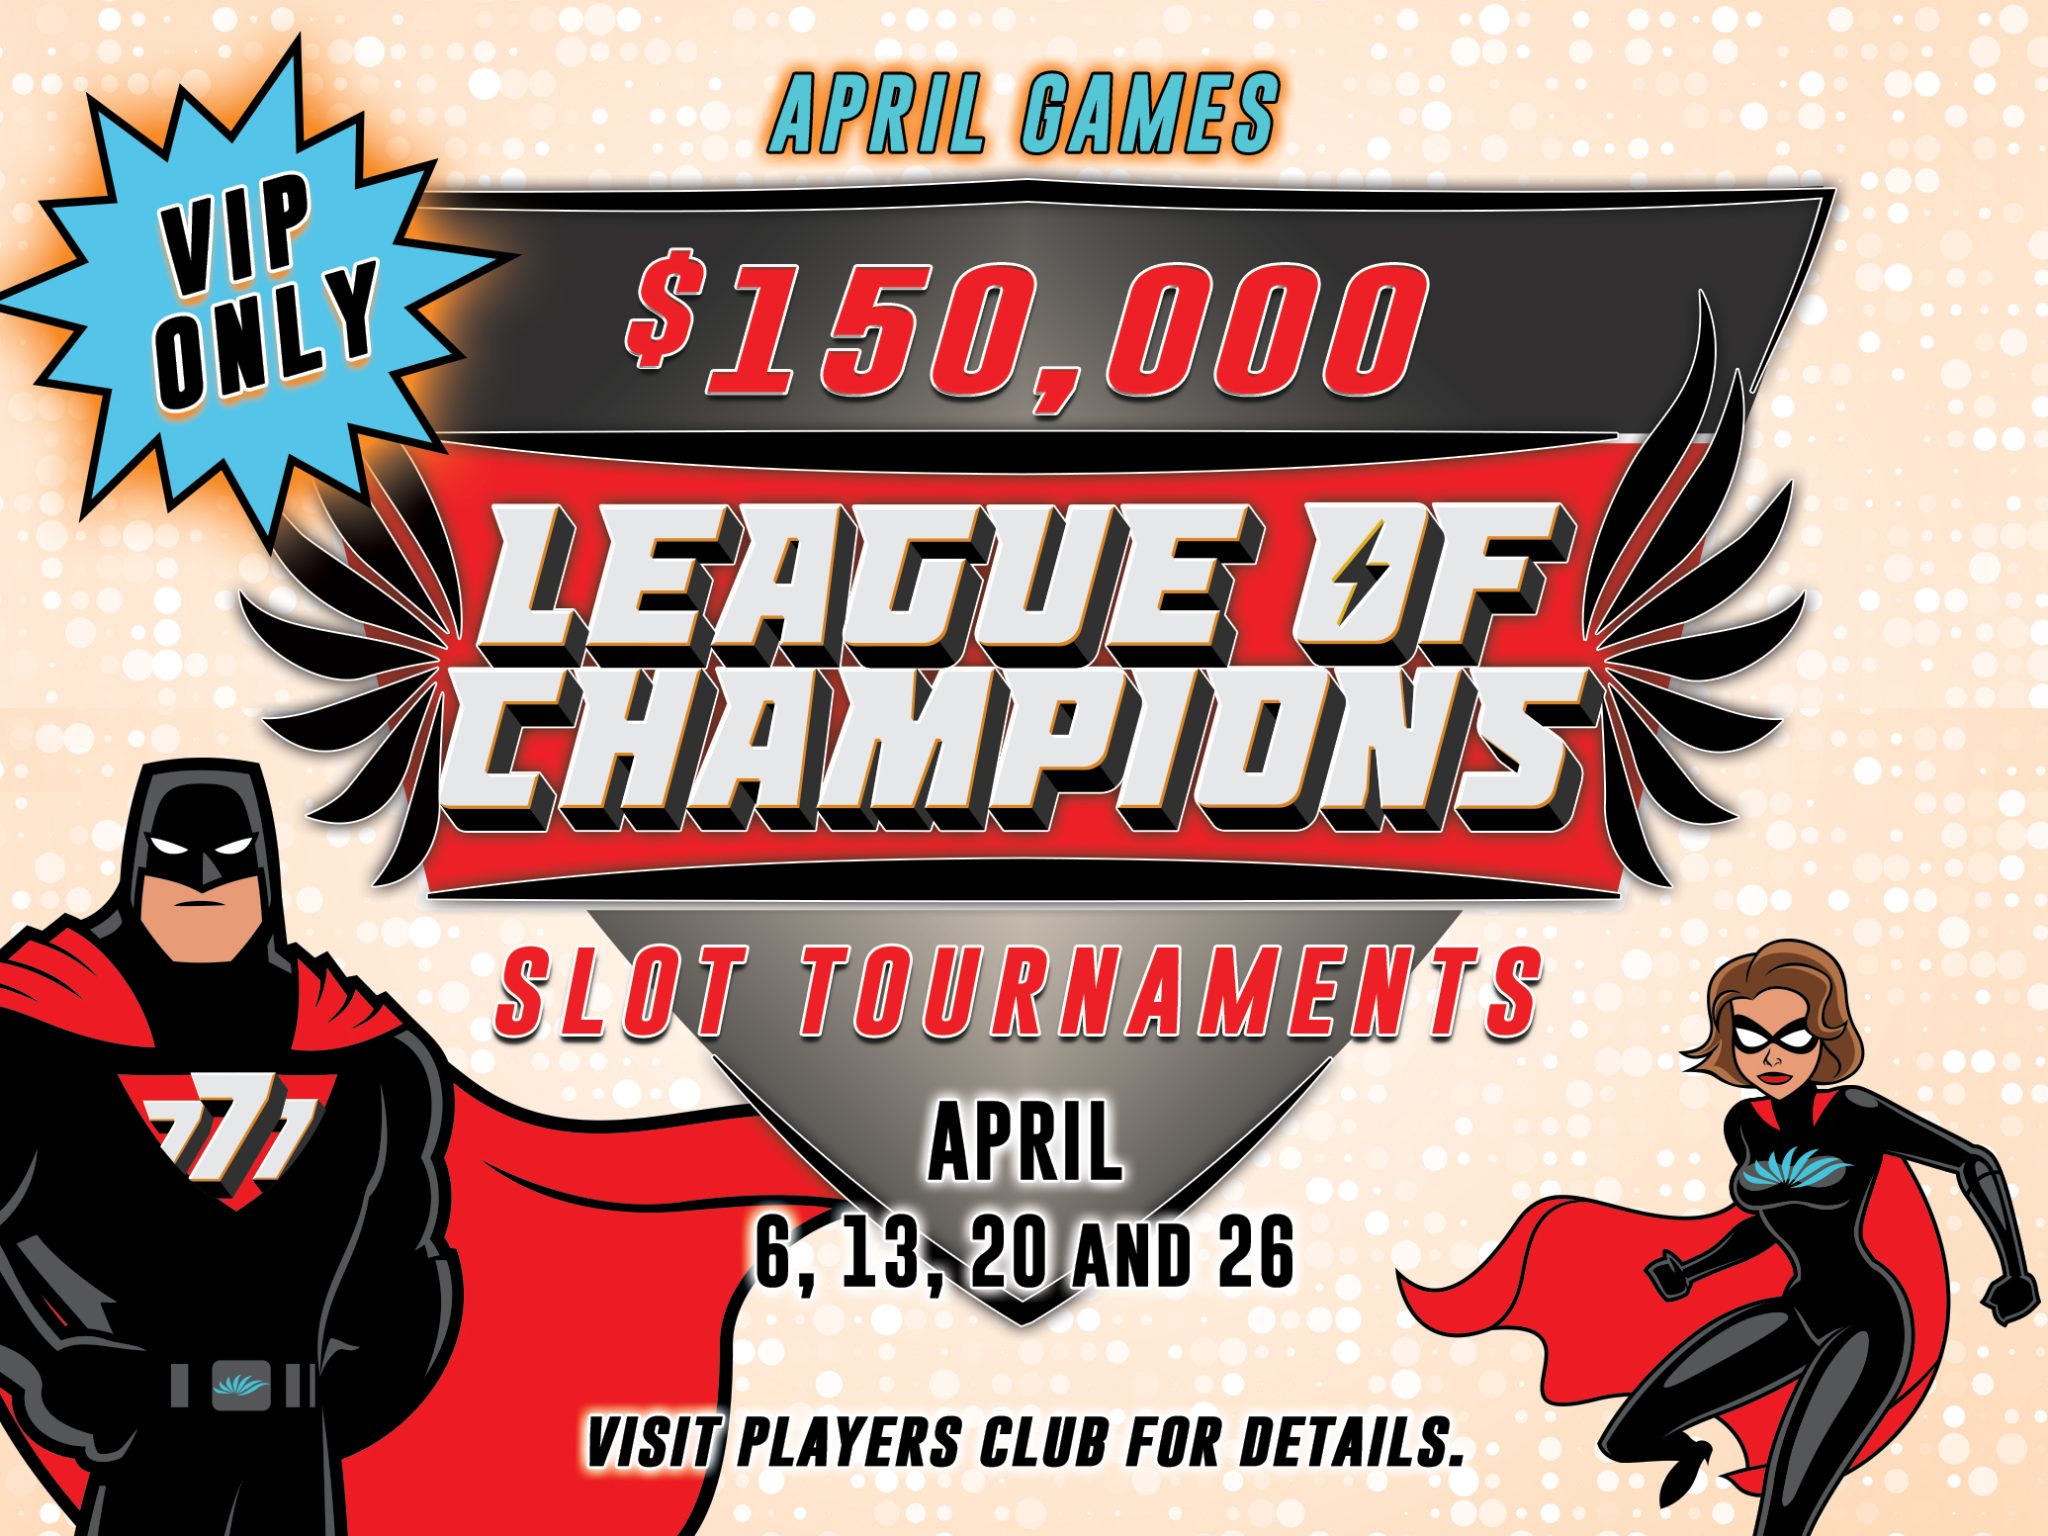 Seven Feathers Casino Resort Offers Guests A Chance To Play And Win During The League Of Champions Slot Tournament This April